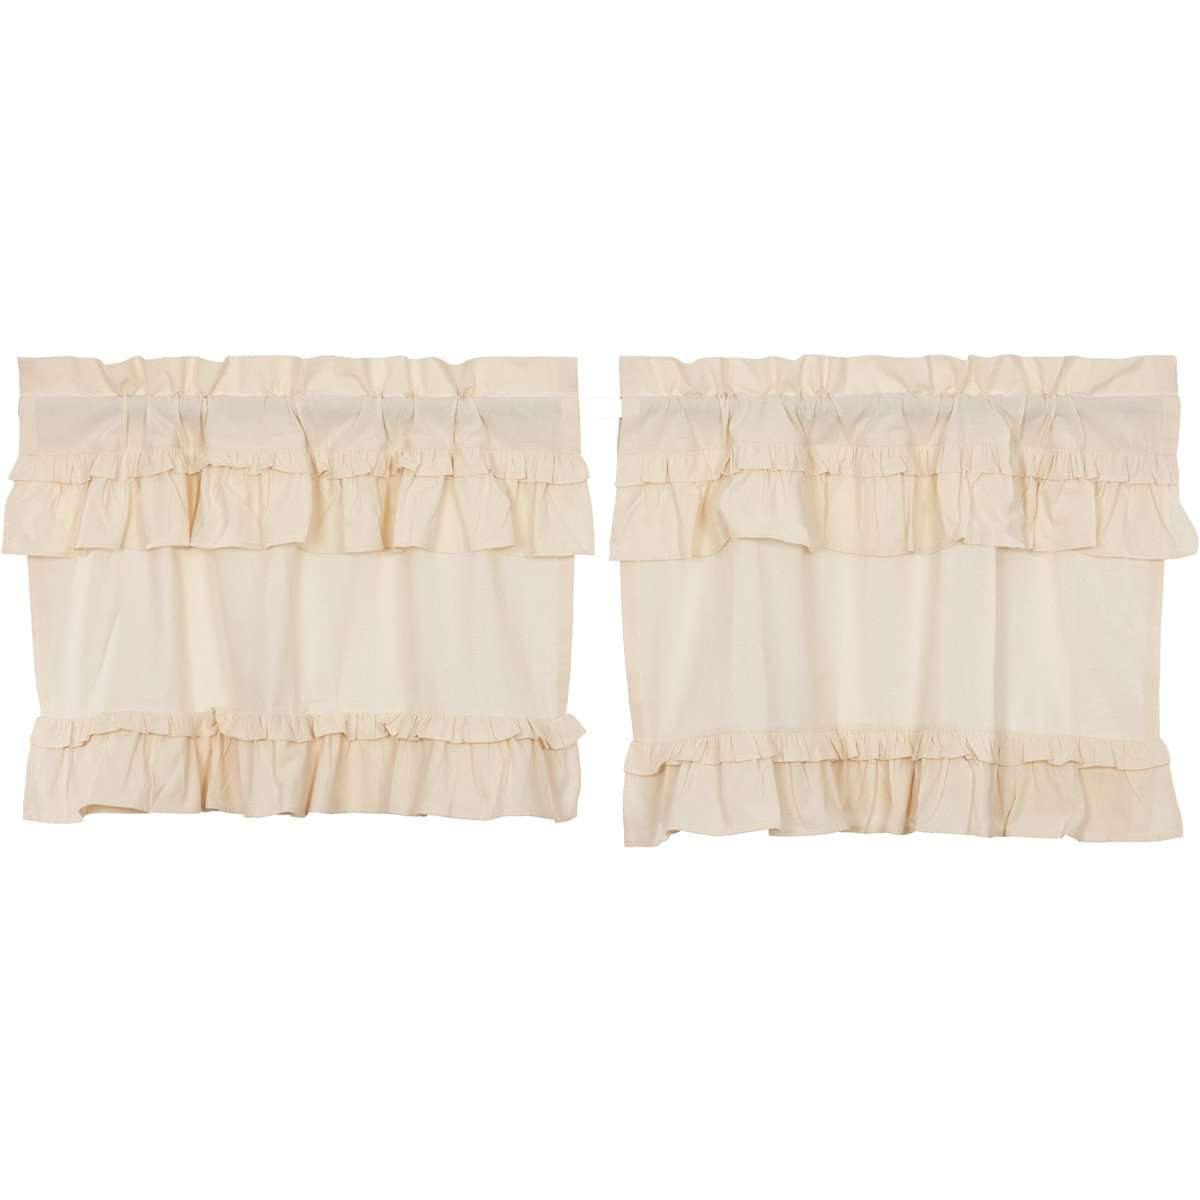 Muslin Ruffled Unbleached Natural Tier Curtain Set of 2 L24xW36 VHC Brands - The Fox Decor